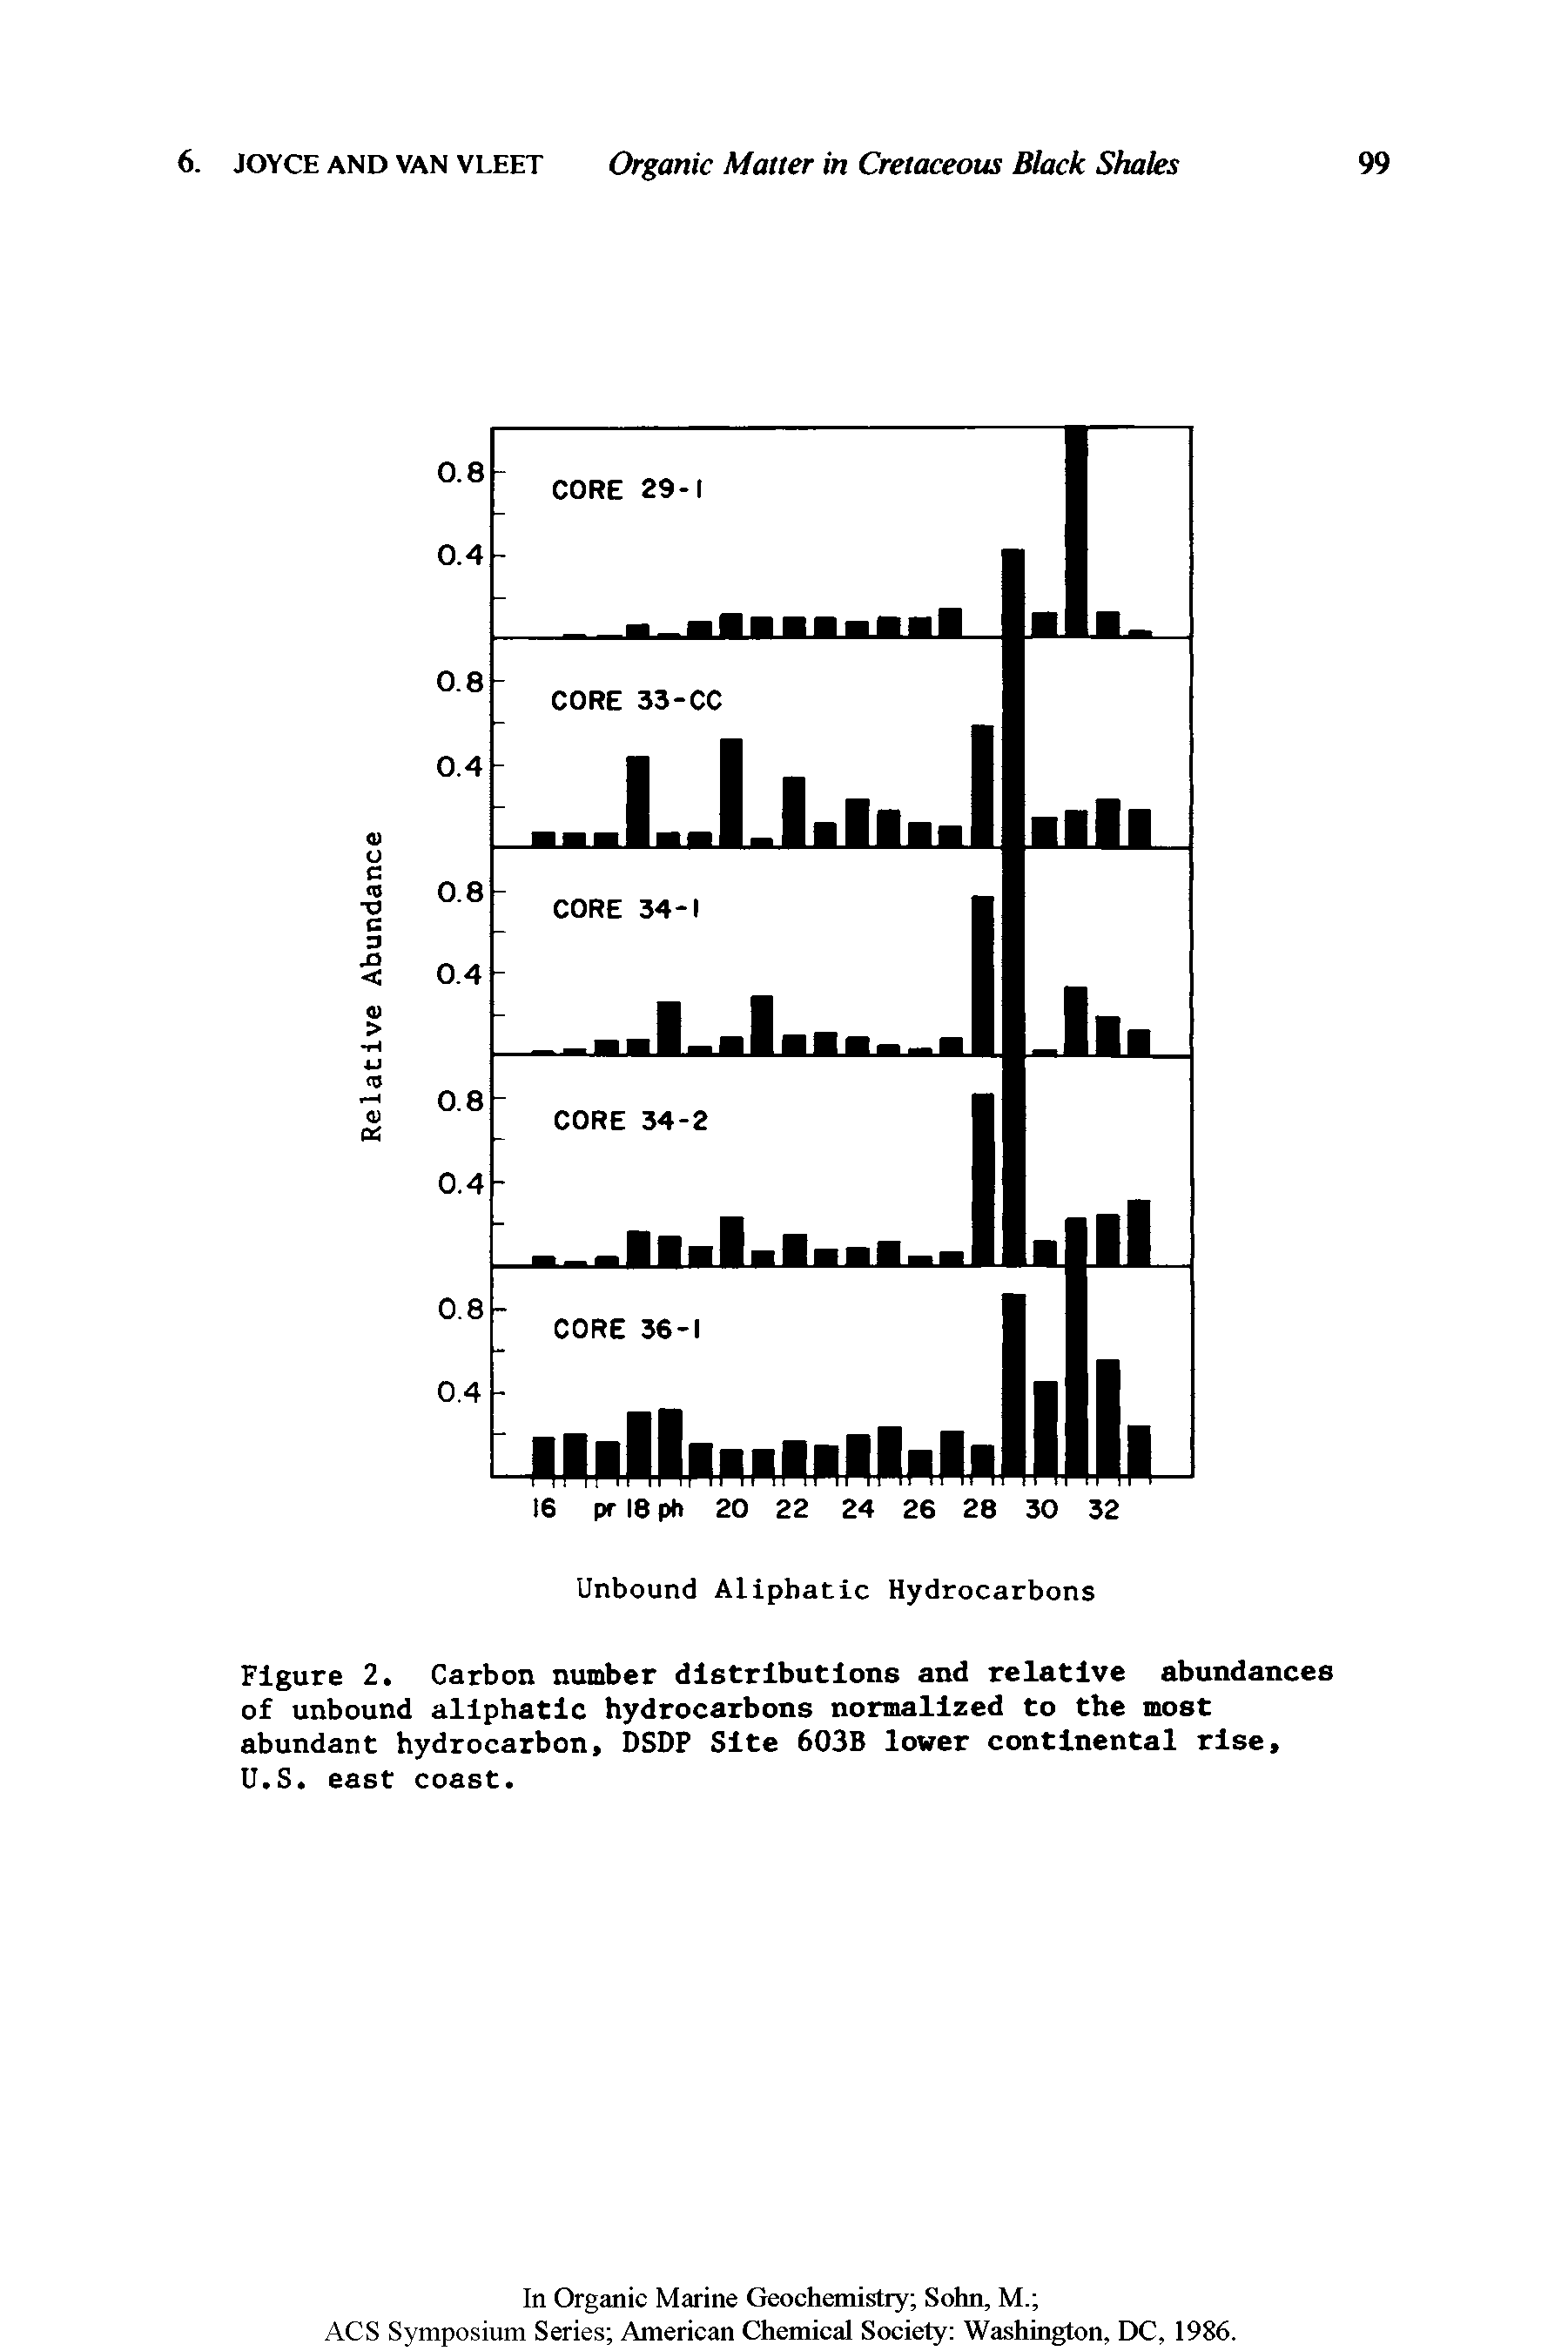 Figure 2. Carbon number distributions and relative abundances of unbound aliphatic hydrocarbons normalized to the most abundant hydrocarbon, DSDP Site 603B lower continental rise, U.S. east coast.